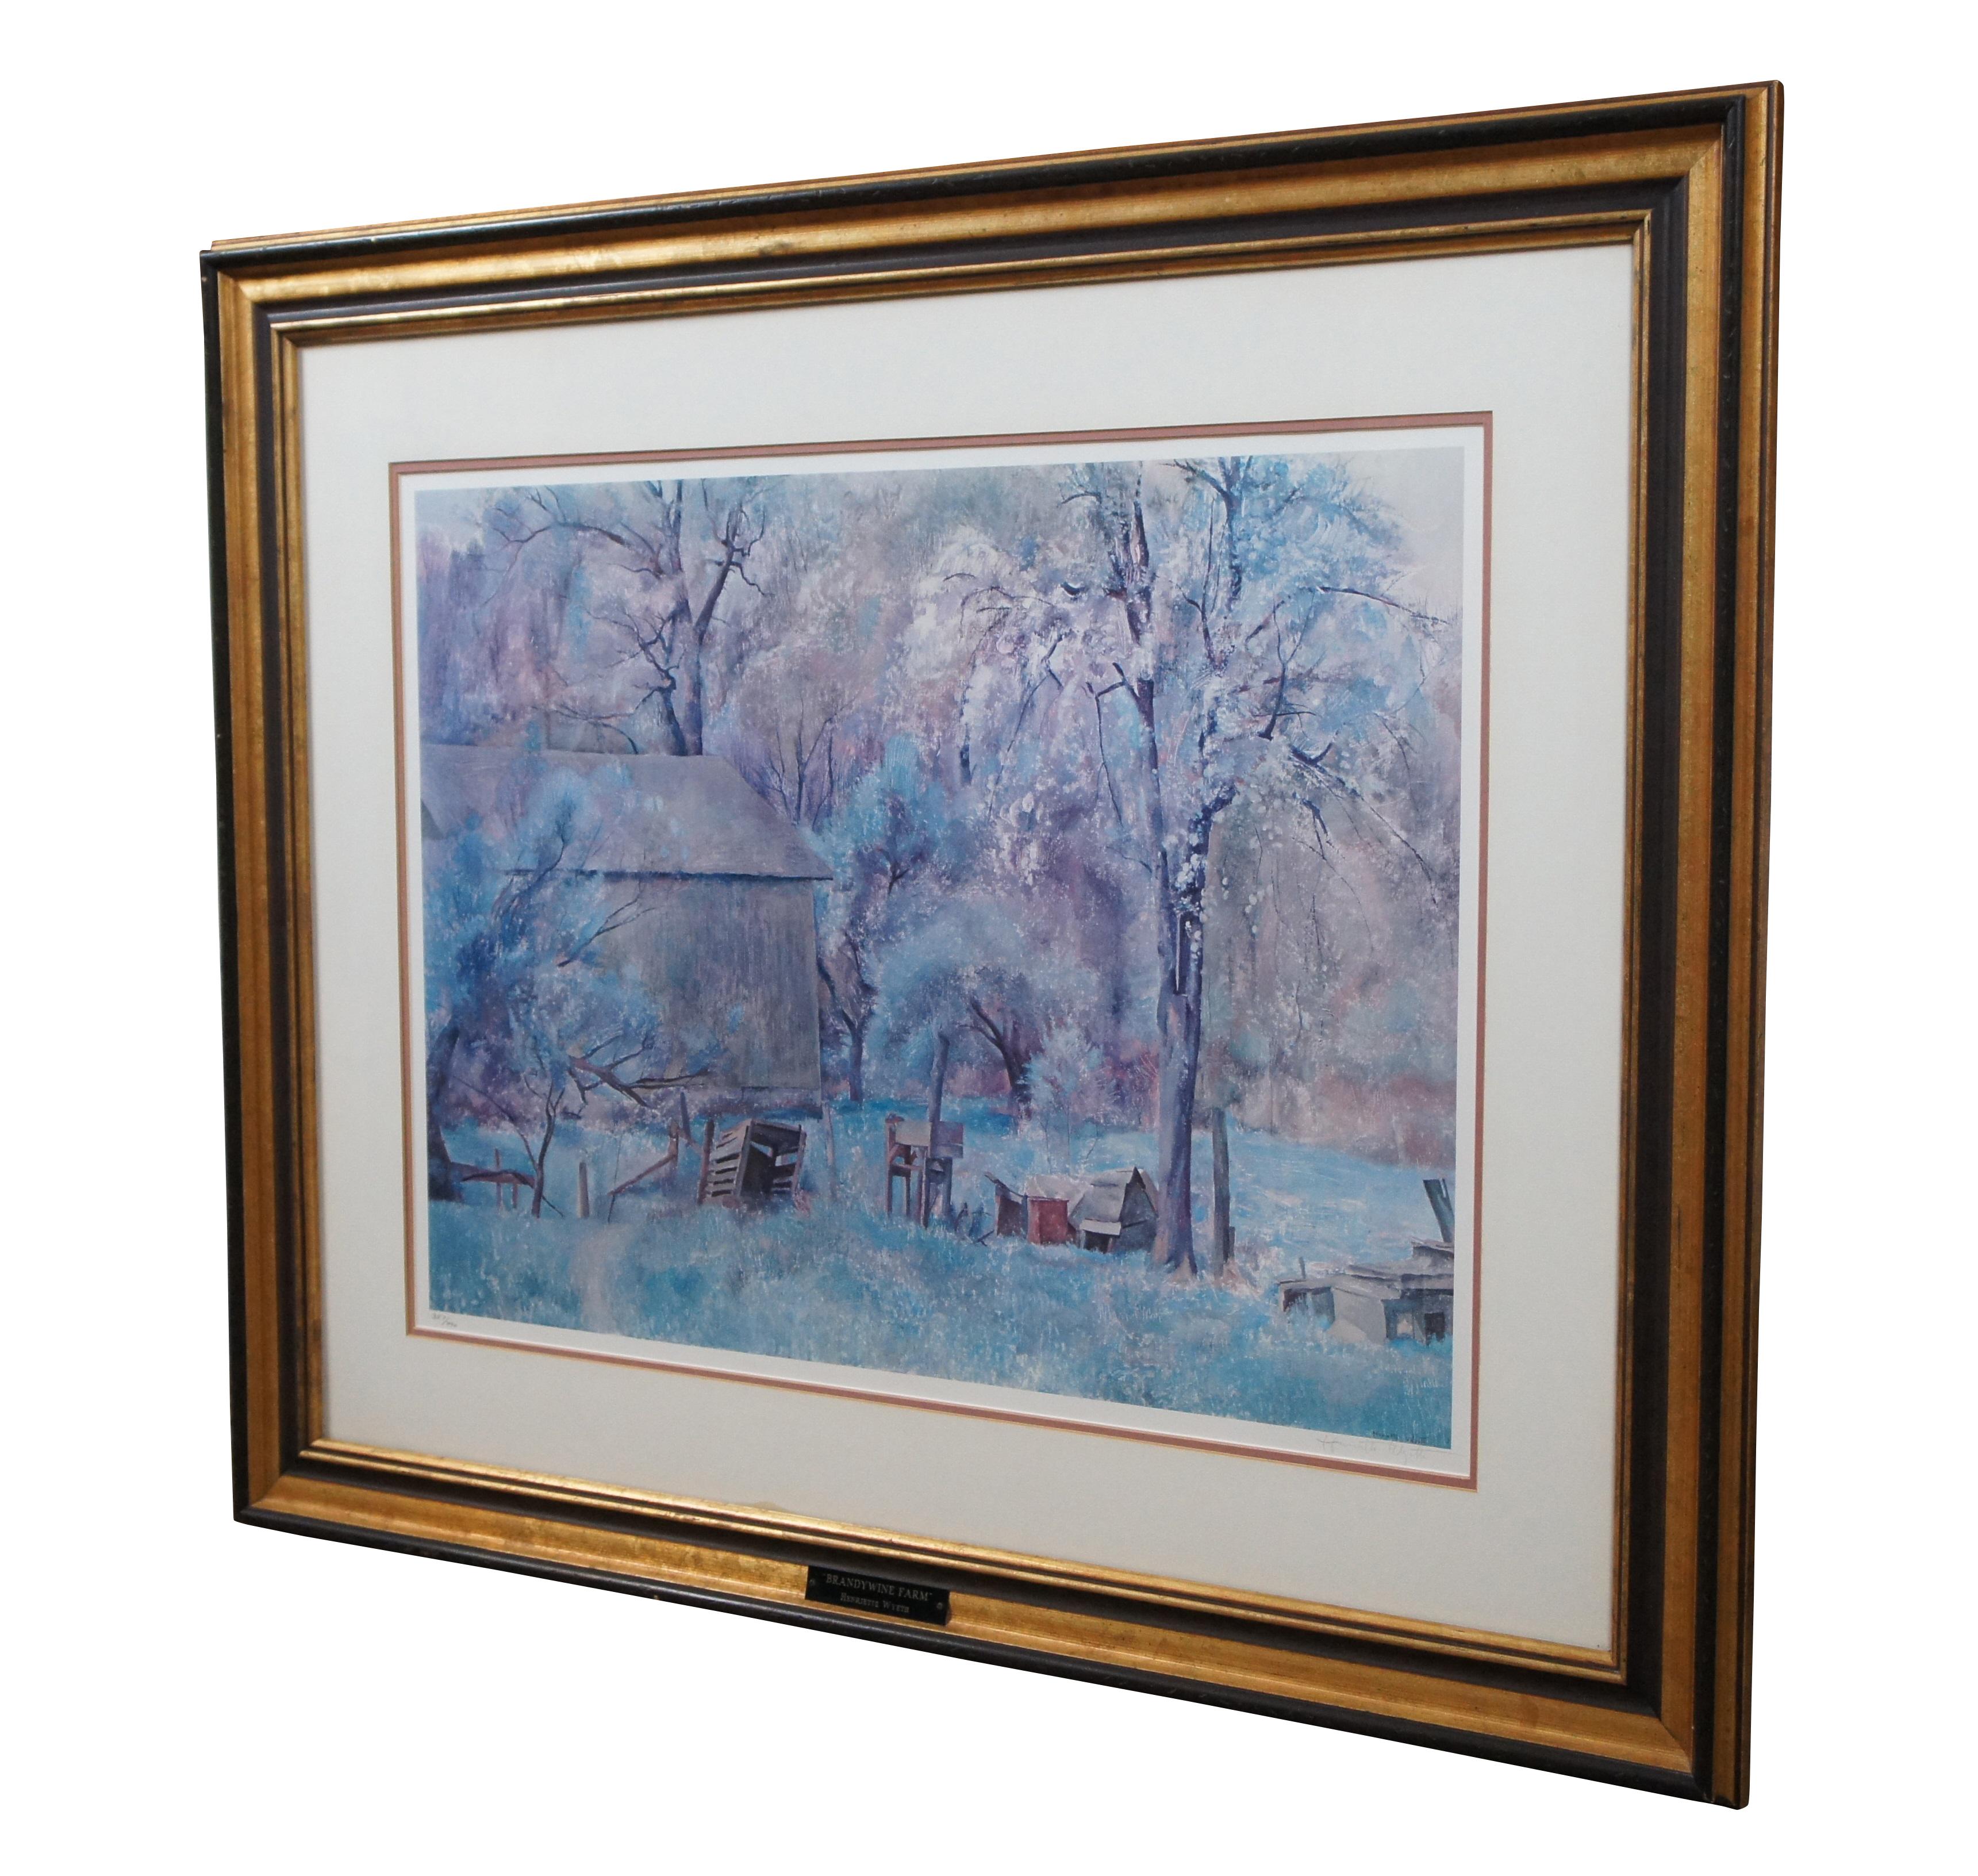 Vintage Henriette Wyeth farmhouse landscape collotype print titled Brandywine Farm.  Includes Certificate of Authenticity, numbered 357/490.  Purchased circa 1982.  Published by Santa Ana Editions, San Patricio New Mexico, Trinton Press